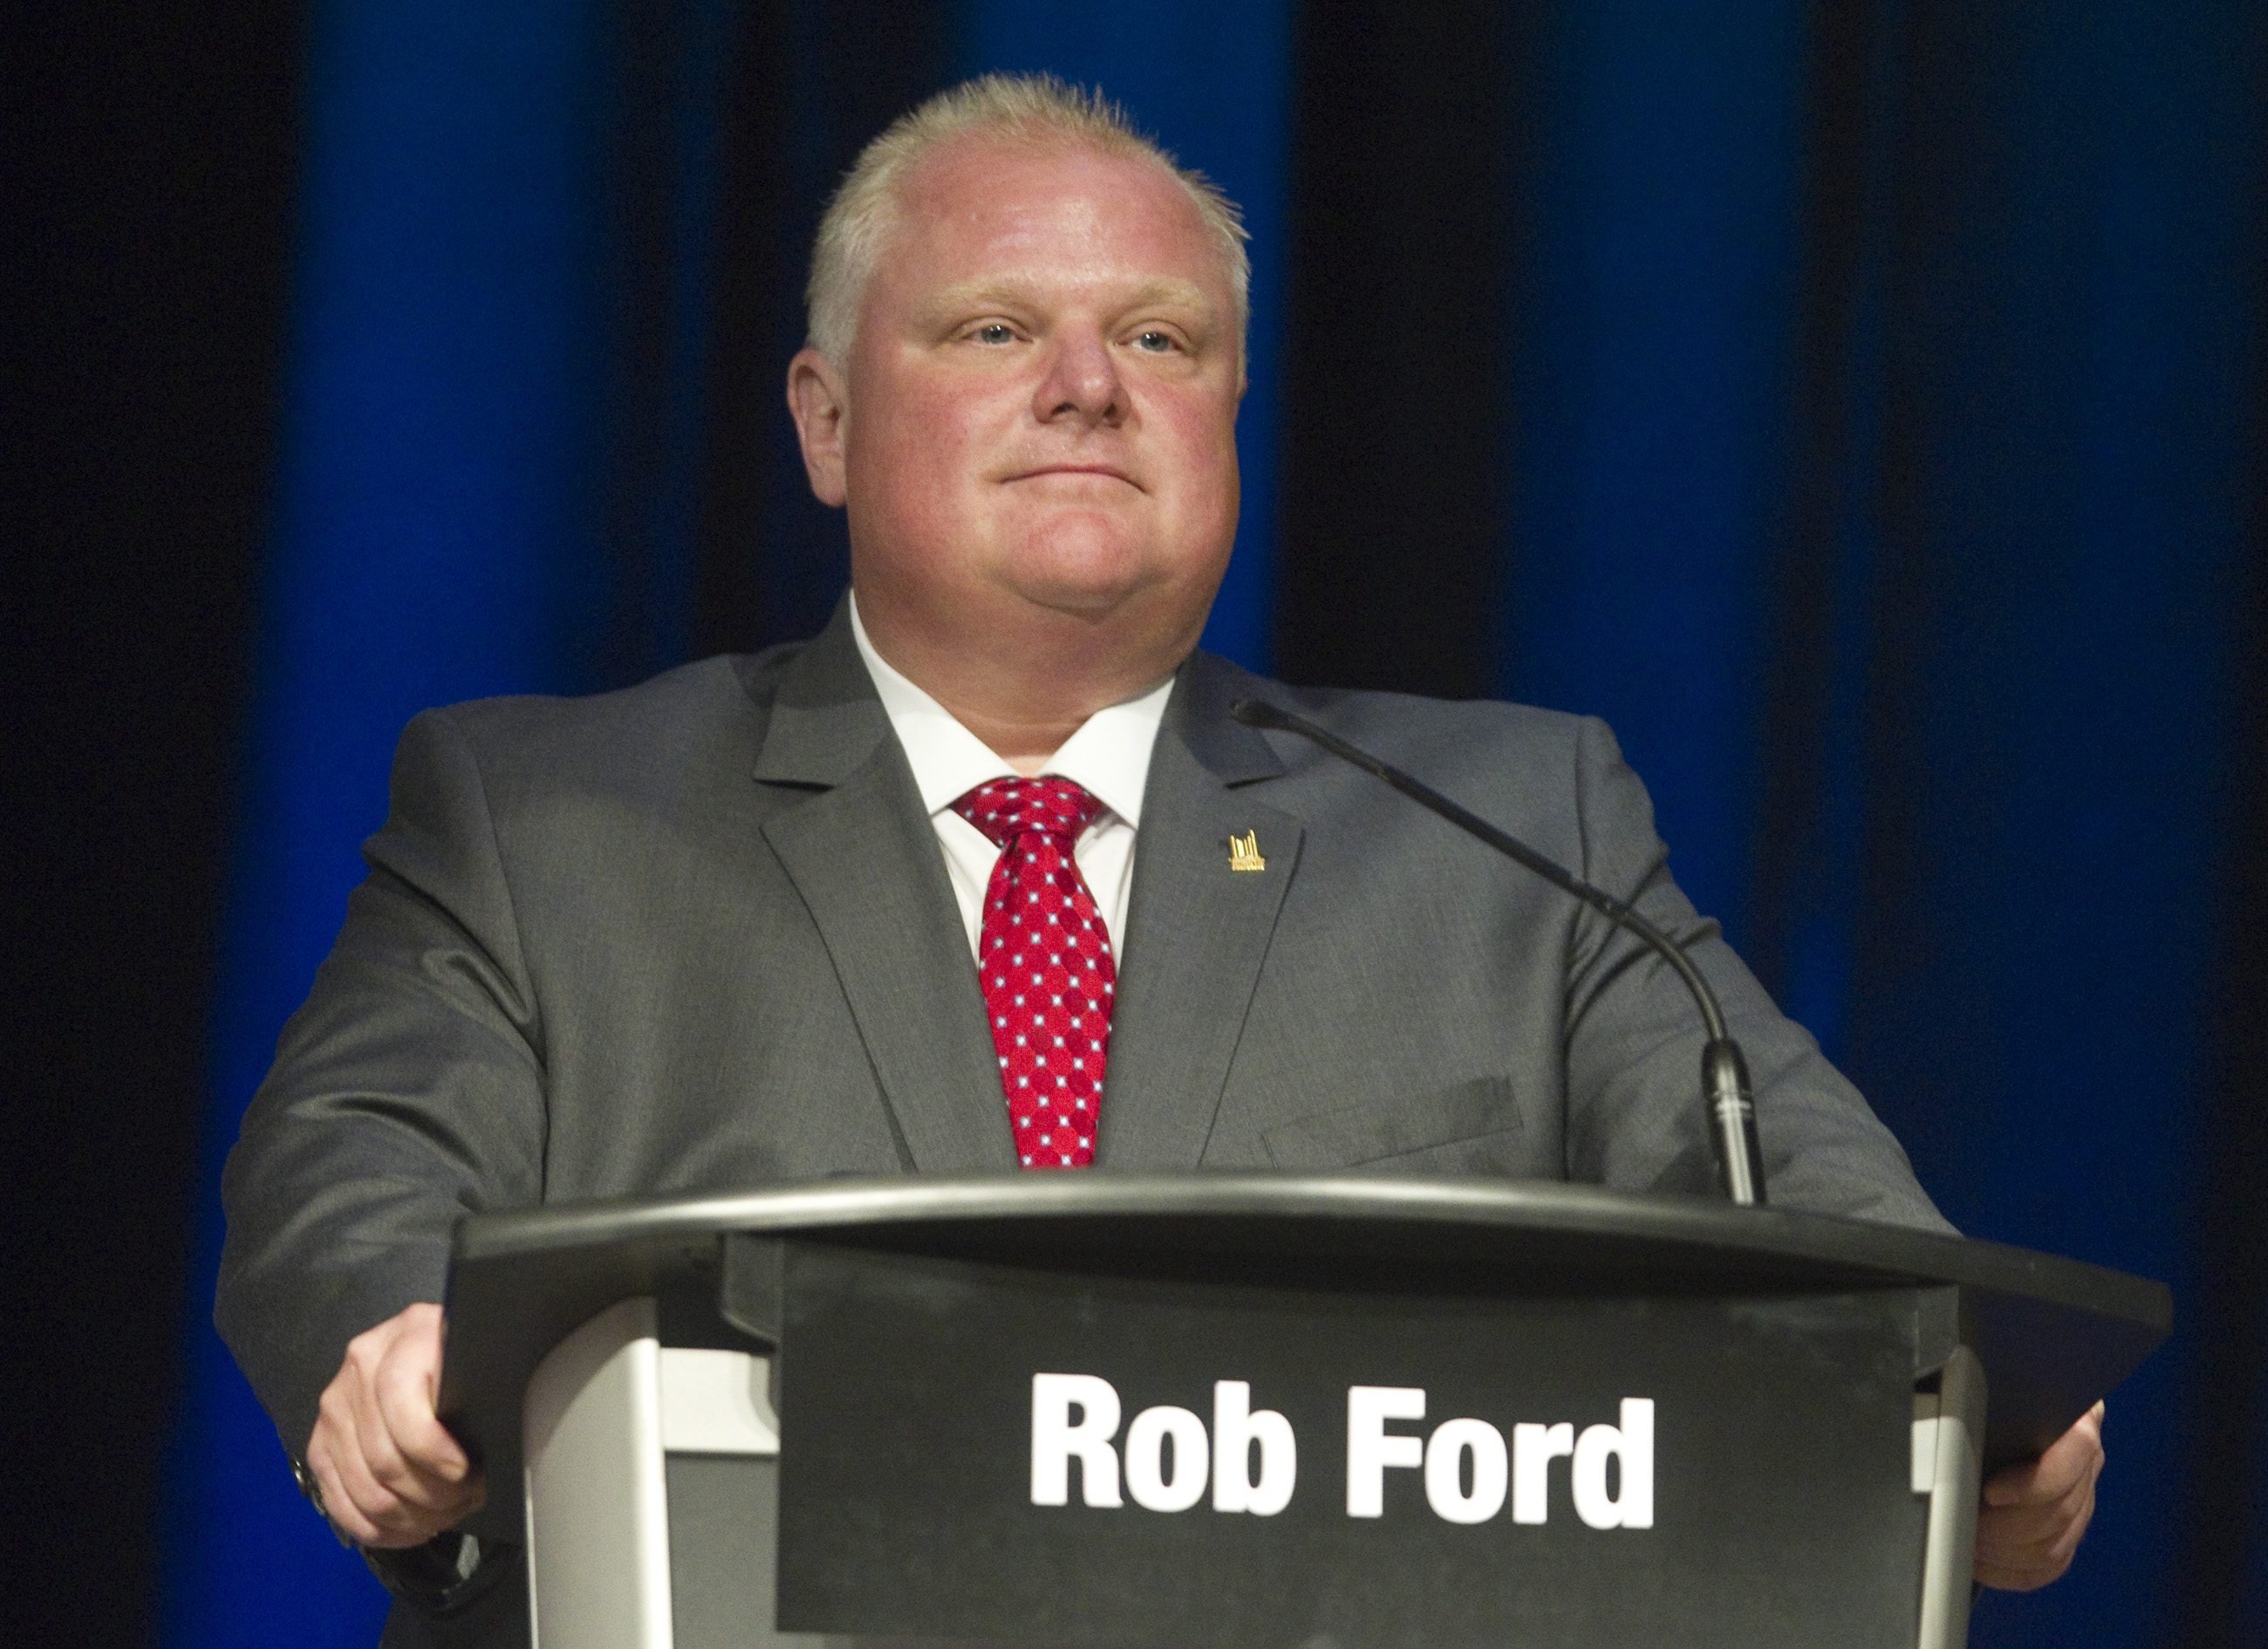 Toronto Mayor Rob Ford participates in a mayoral debate in Scarborough, Ontario, on July 15, 2014 (Fred Thornhill—Reuters)